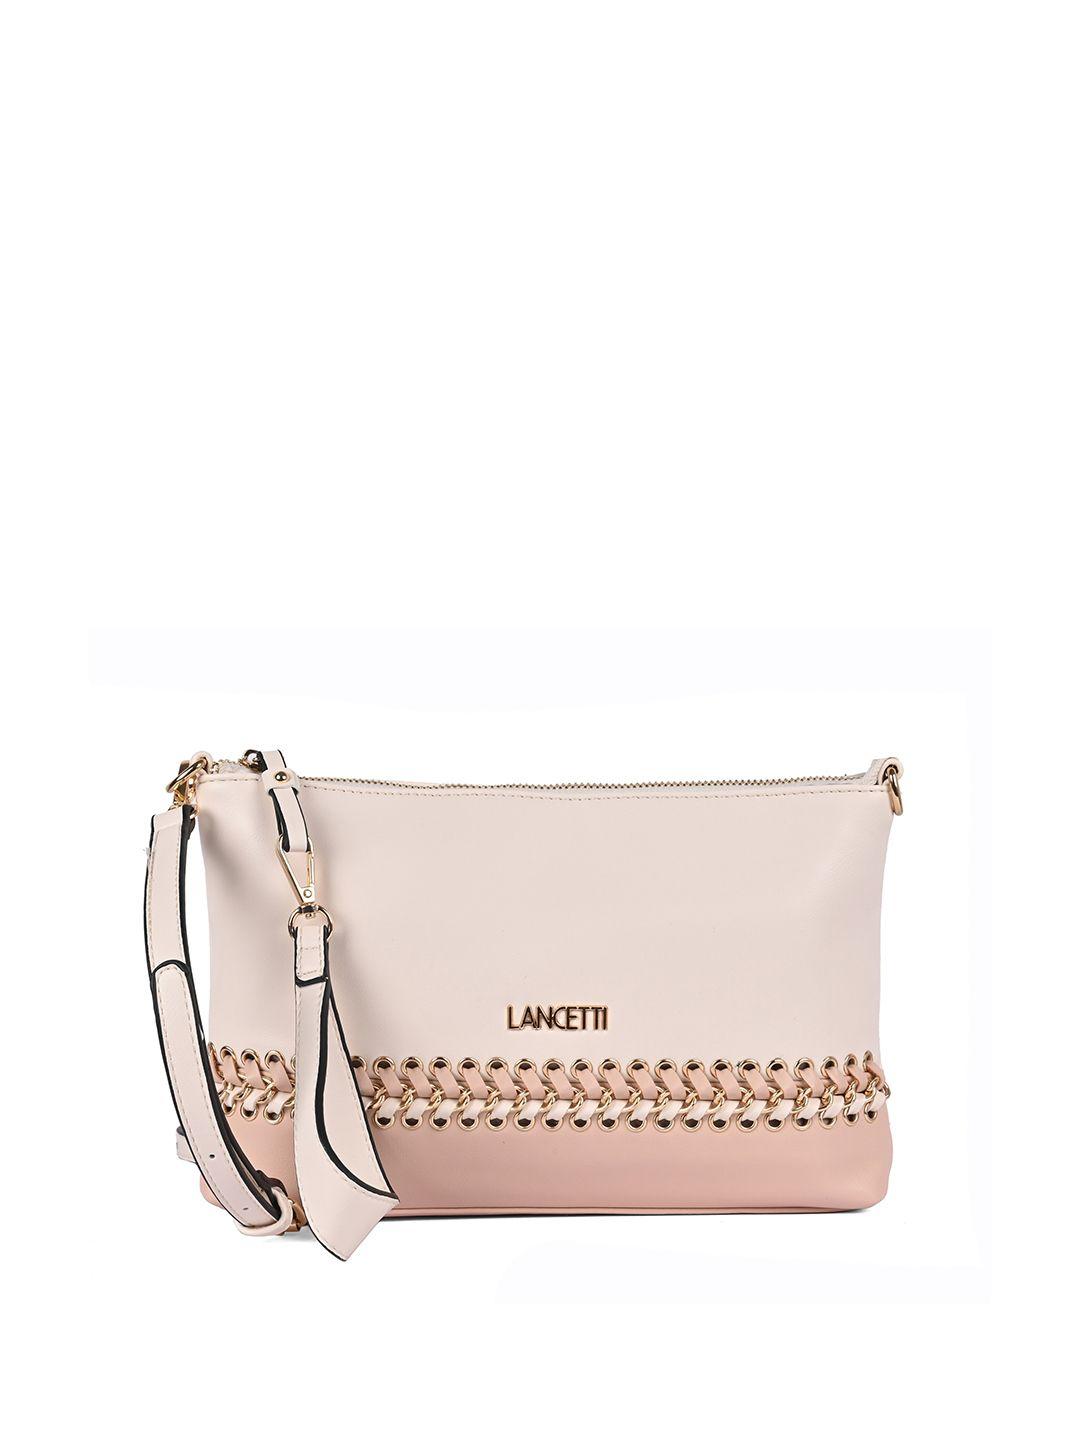 lancetti nude-coloured & gold-toned embellished purse clutch